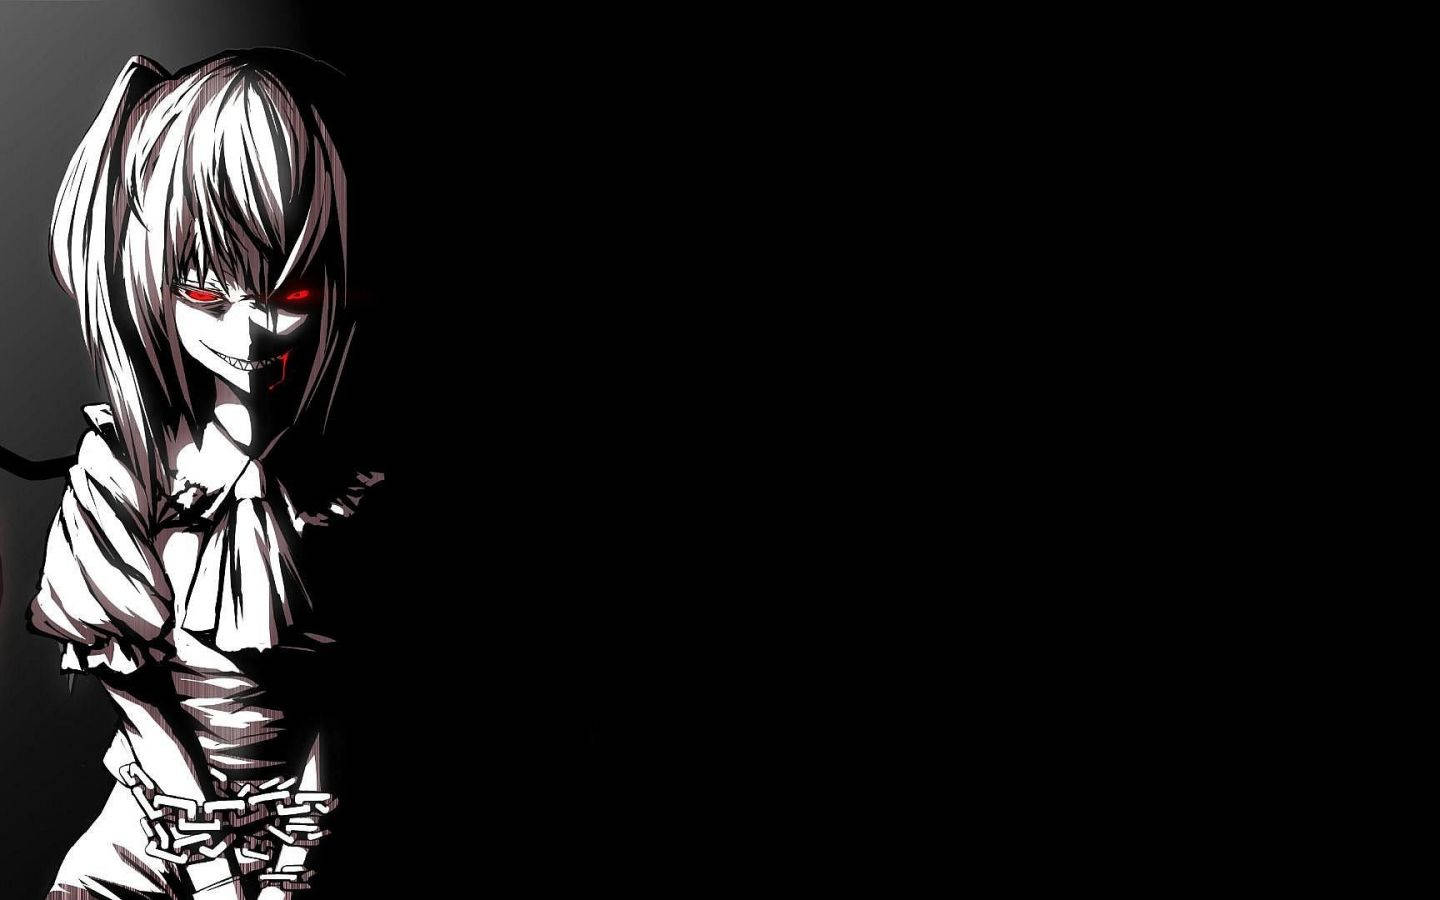 Black And White Anime Aesthetic Girl With Chains Wallpaper